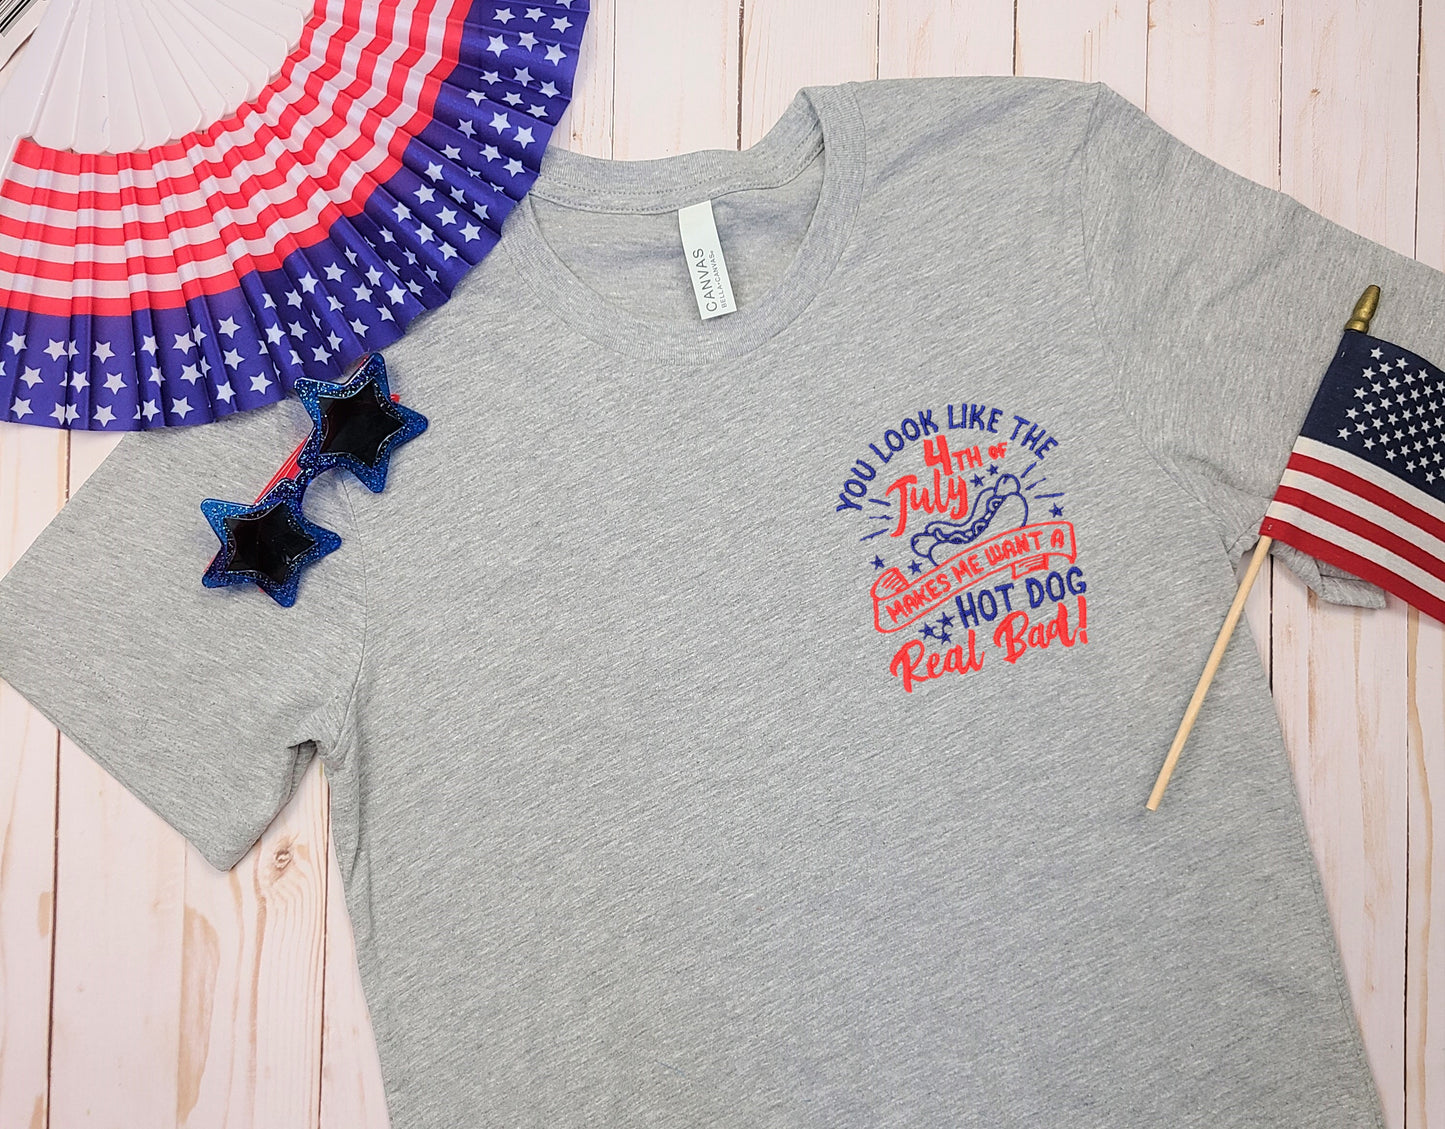 You Look Like the 4th of July! Makes Me Want a Hotdog Real Bad Embroidered Tee